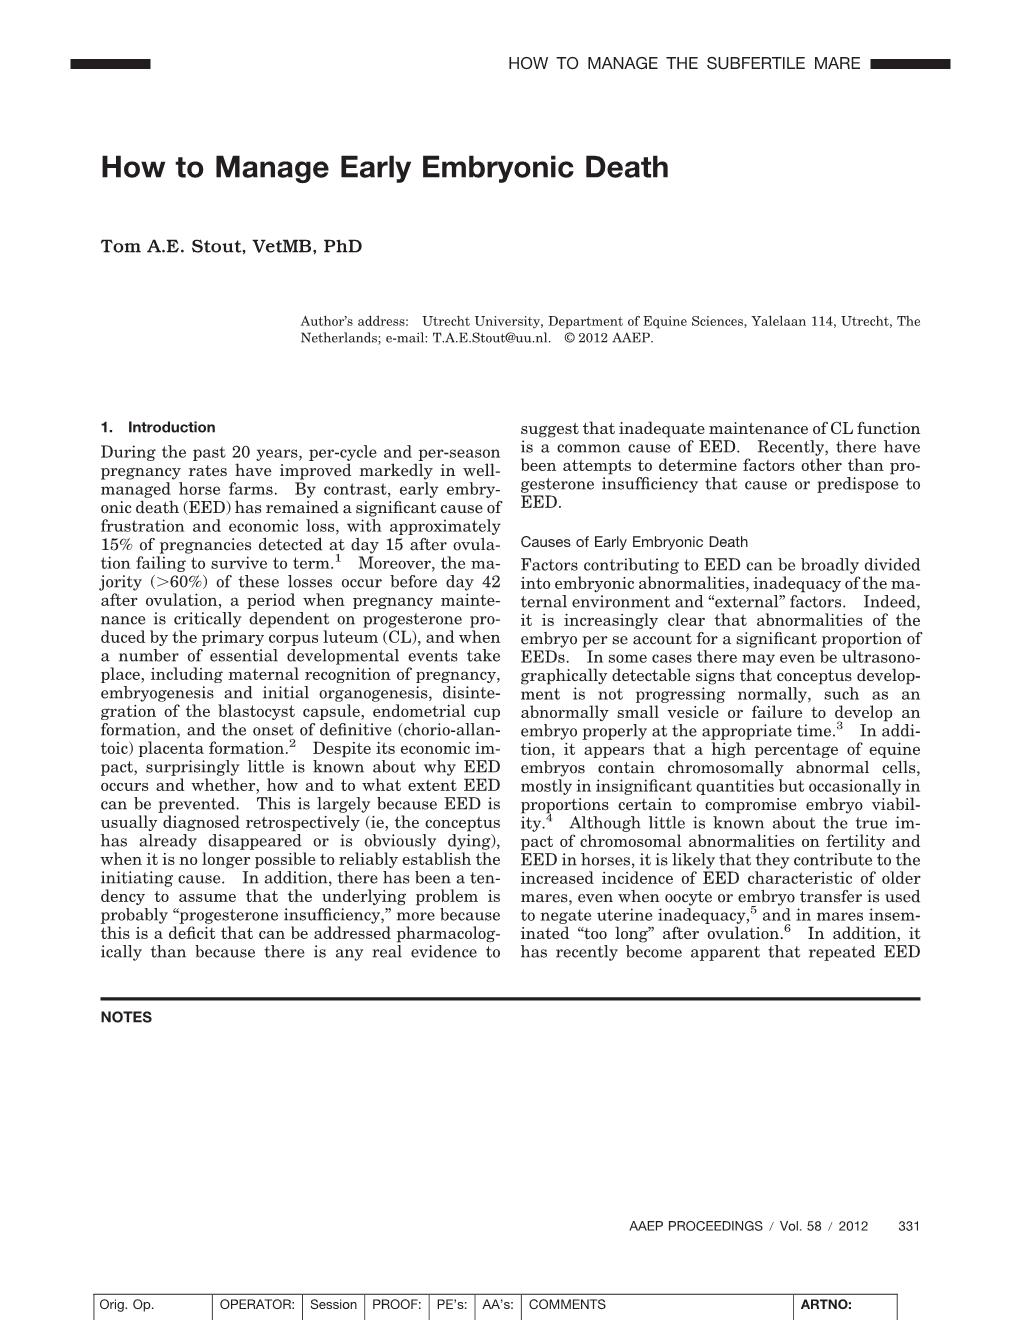 How to Manage Early Embryonic Death